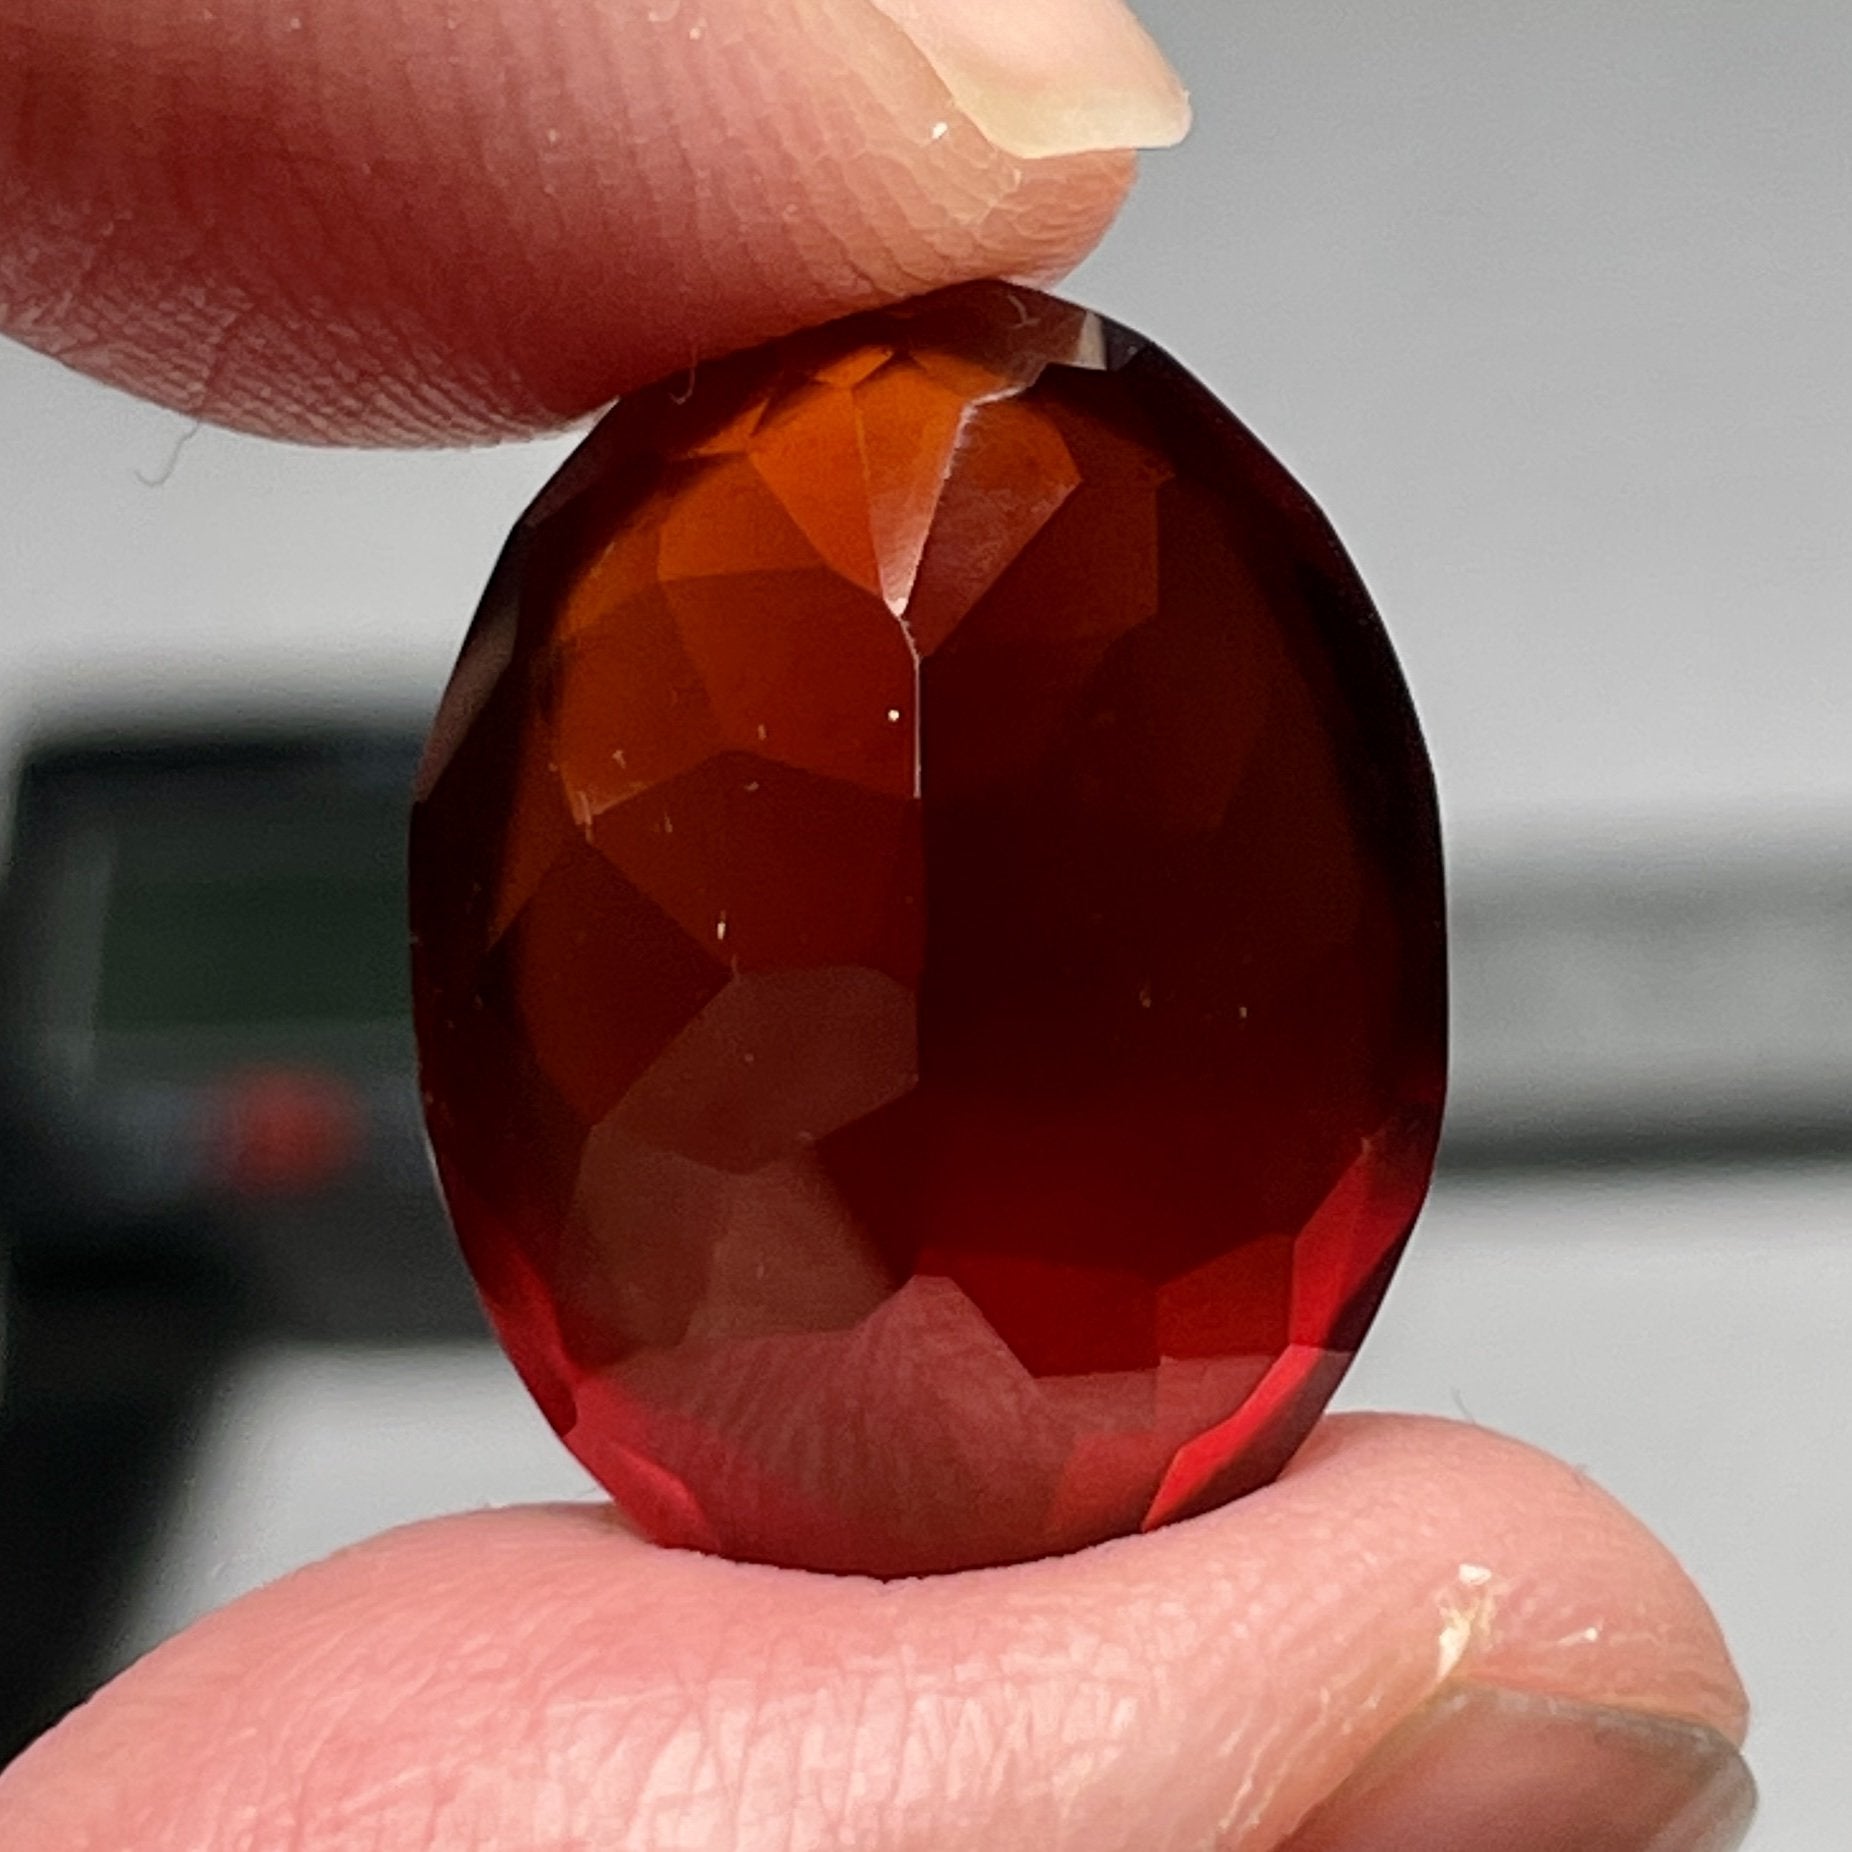 22.88Ct Hessonite Garnet Tanzania Untreated Unheated. 19 X 14 9.1 Mm. Use Either Side.